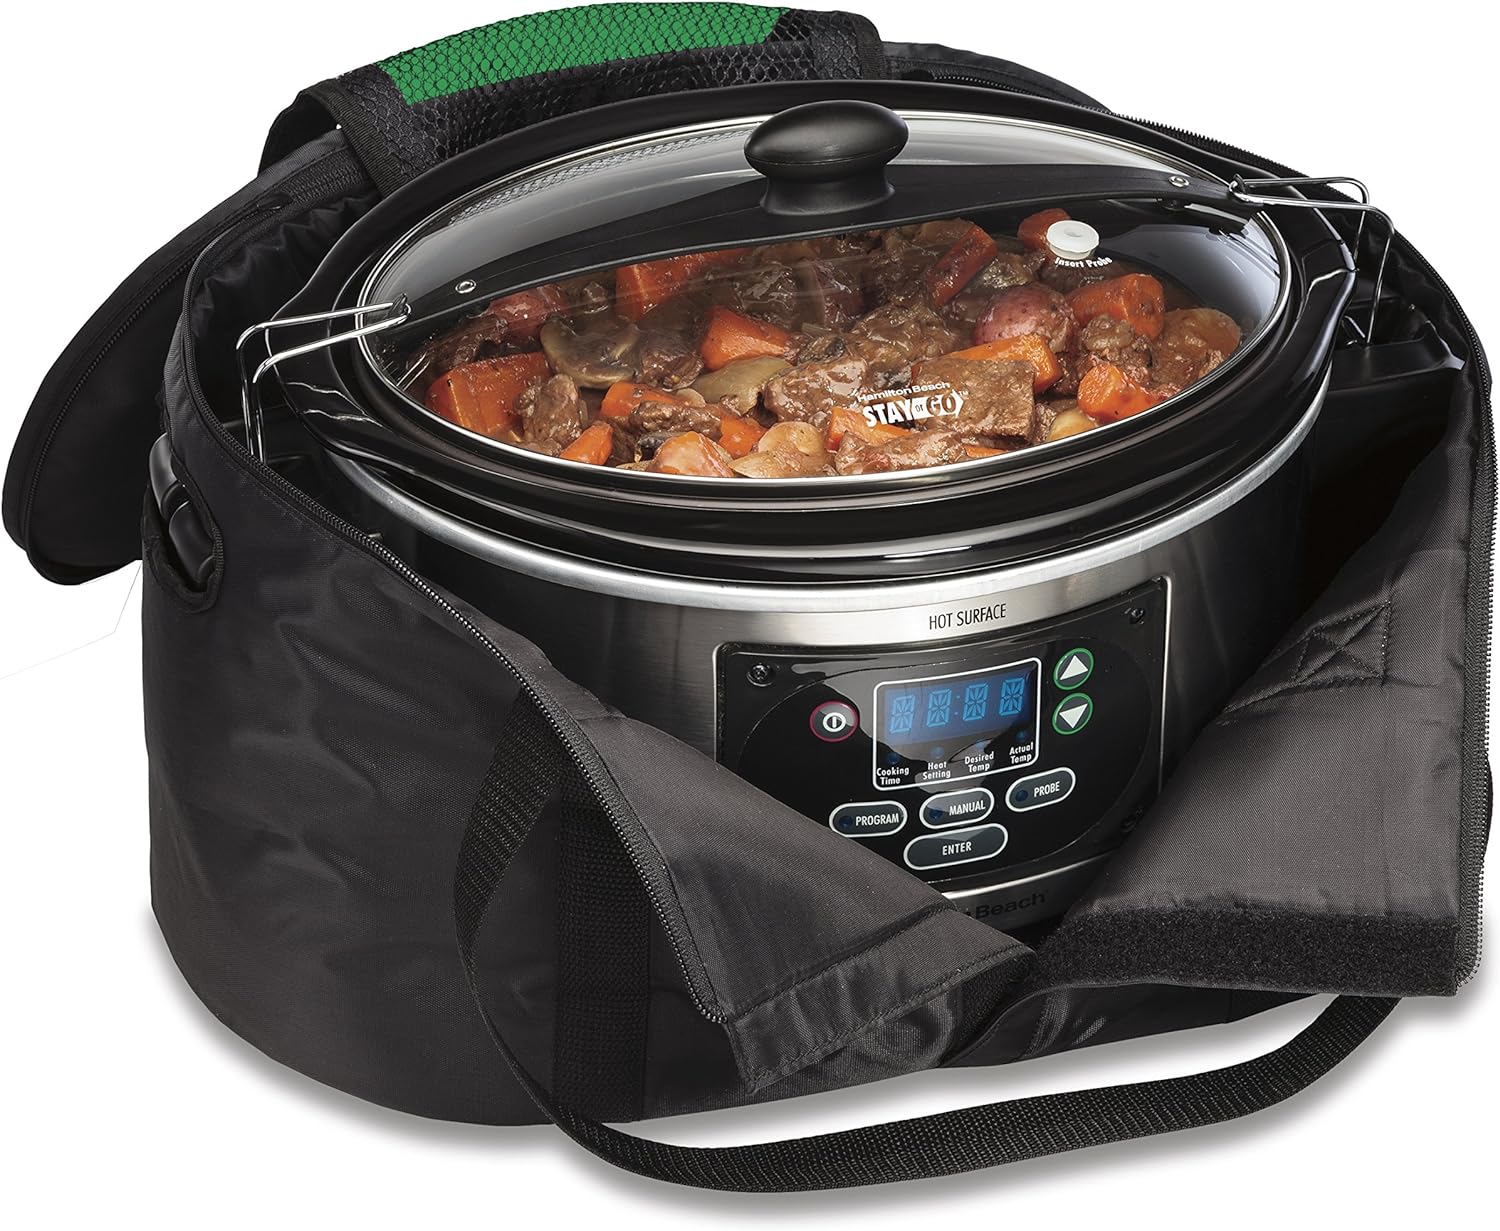 Hamilton Beach Stay or Go Portable Slow Cooker with Lid Lock, Dishwasher-Safe Crock, 6-Quart, Black  Travel Case  Carrier Insulated Bag for 4, 5, 6, 7  8 Quart Slow Cookers (33002),Black